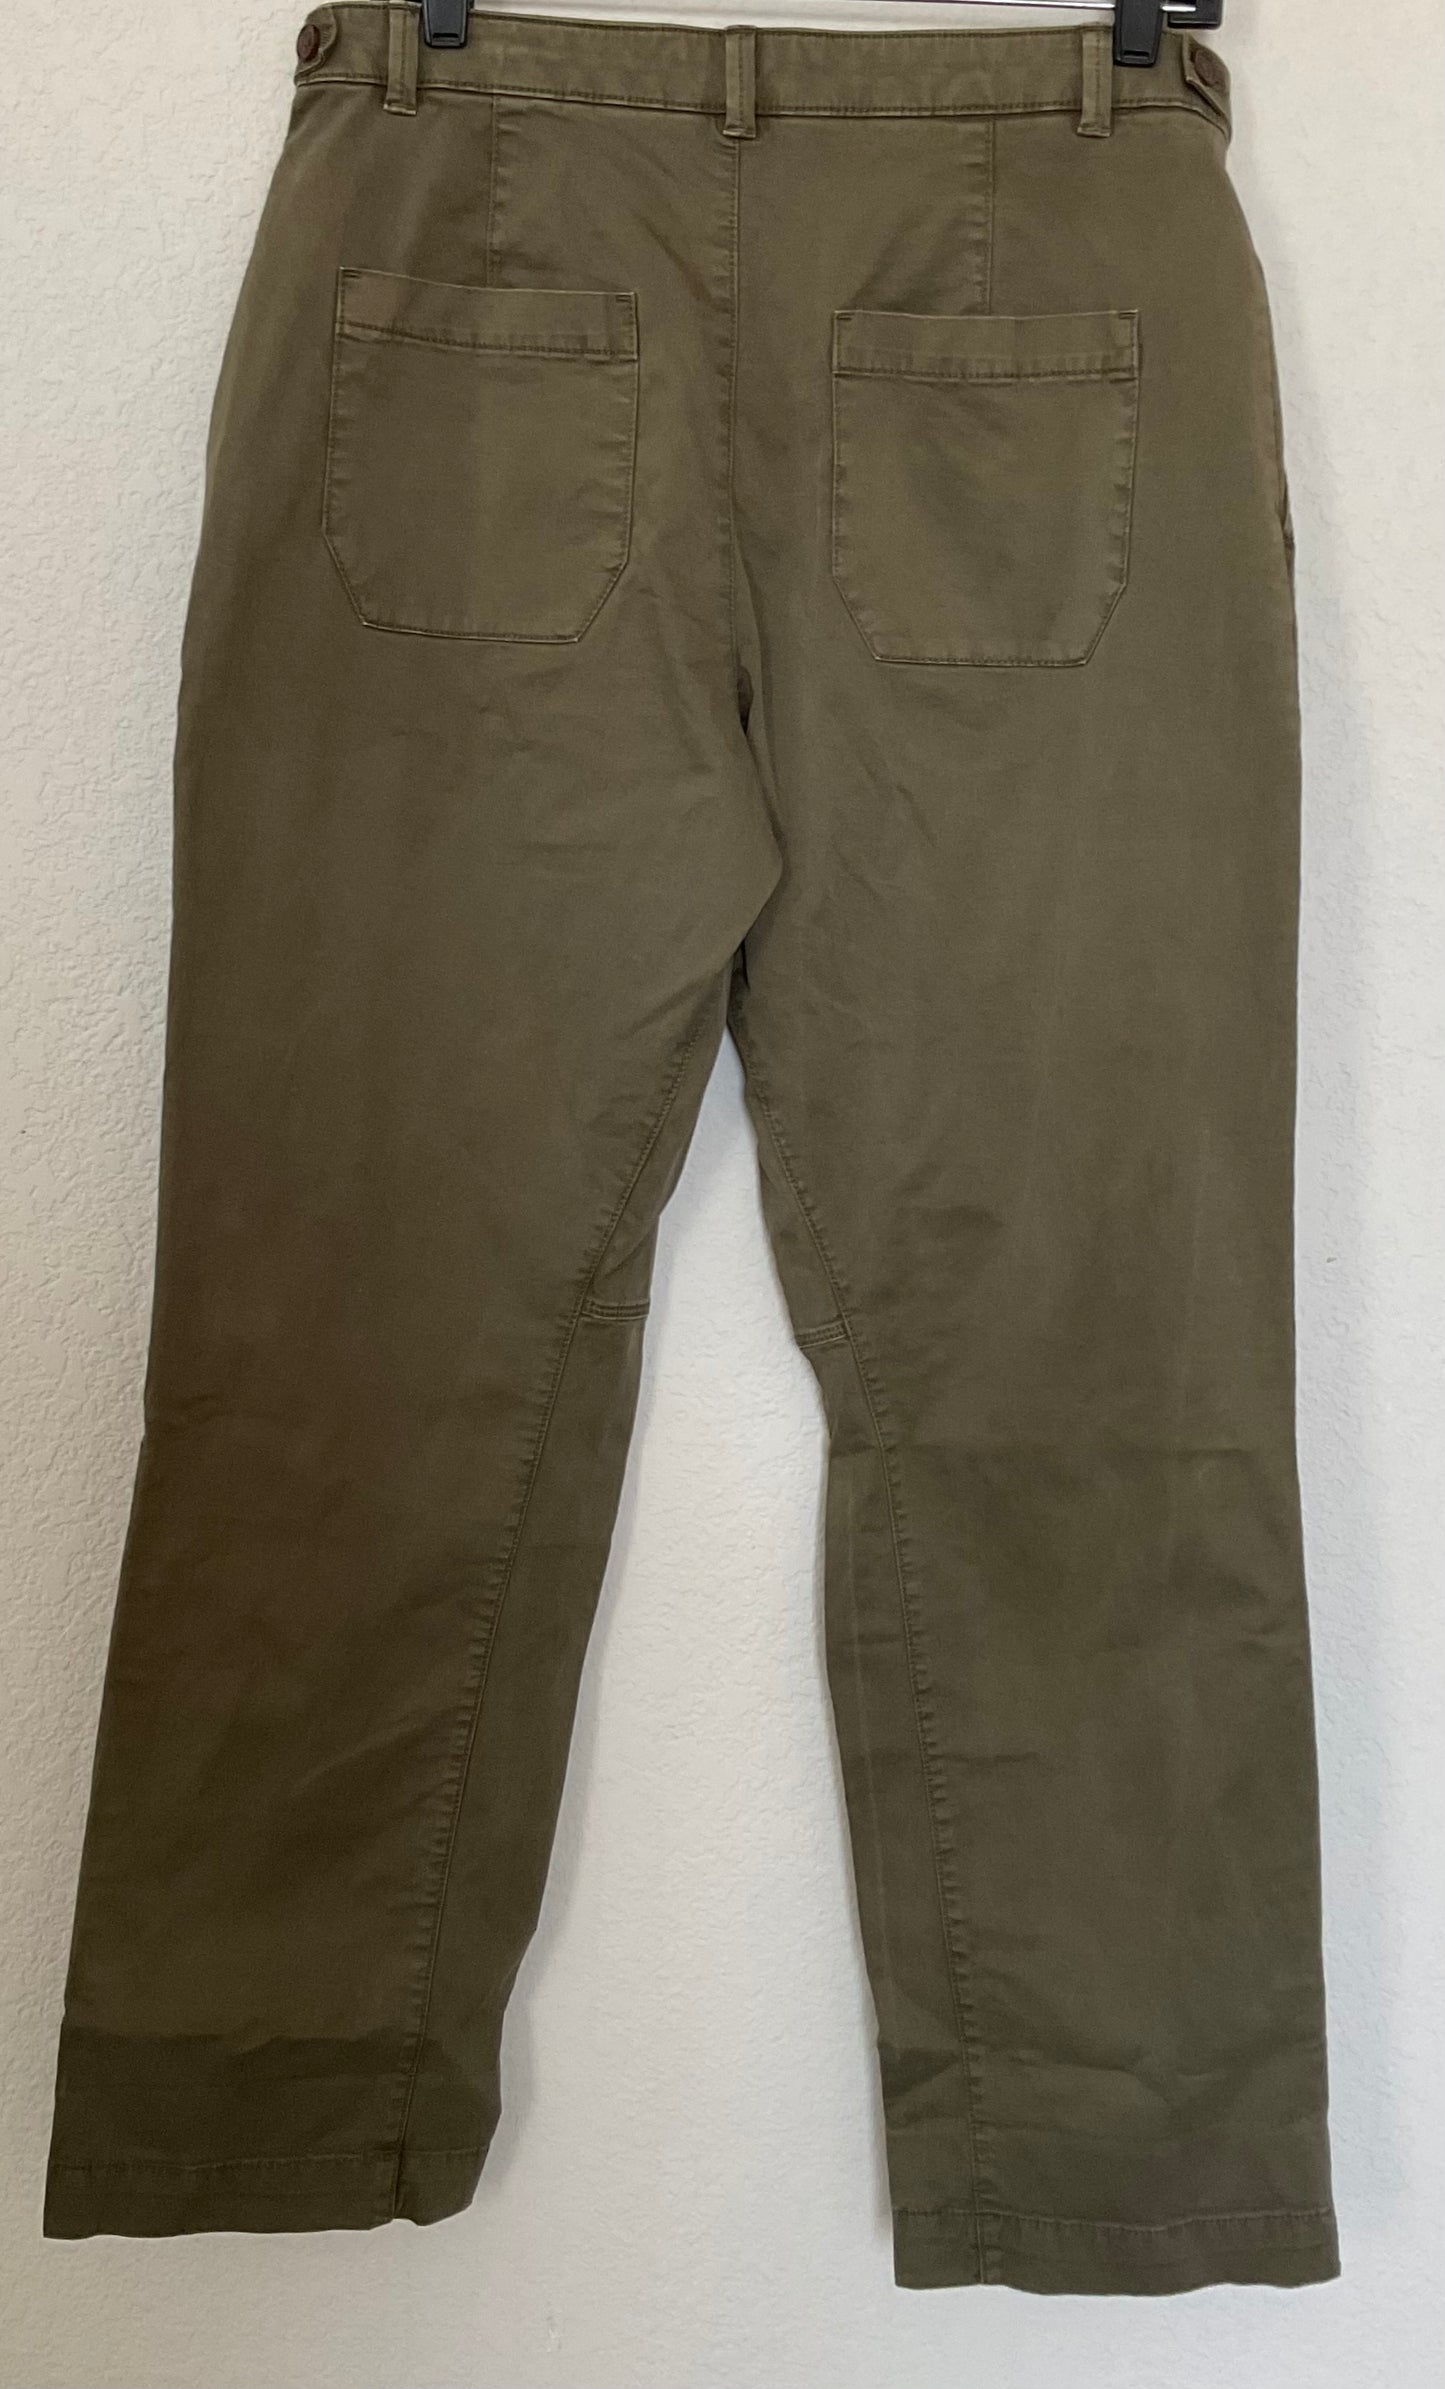 Banana Republic Pleated Green Olive Women’s Casual Trousers  Size 6